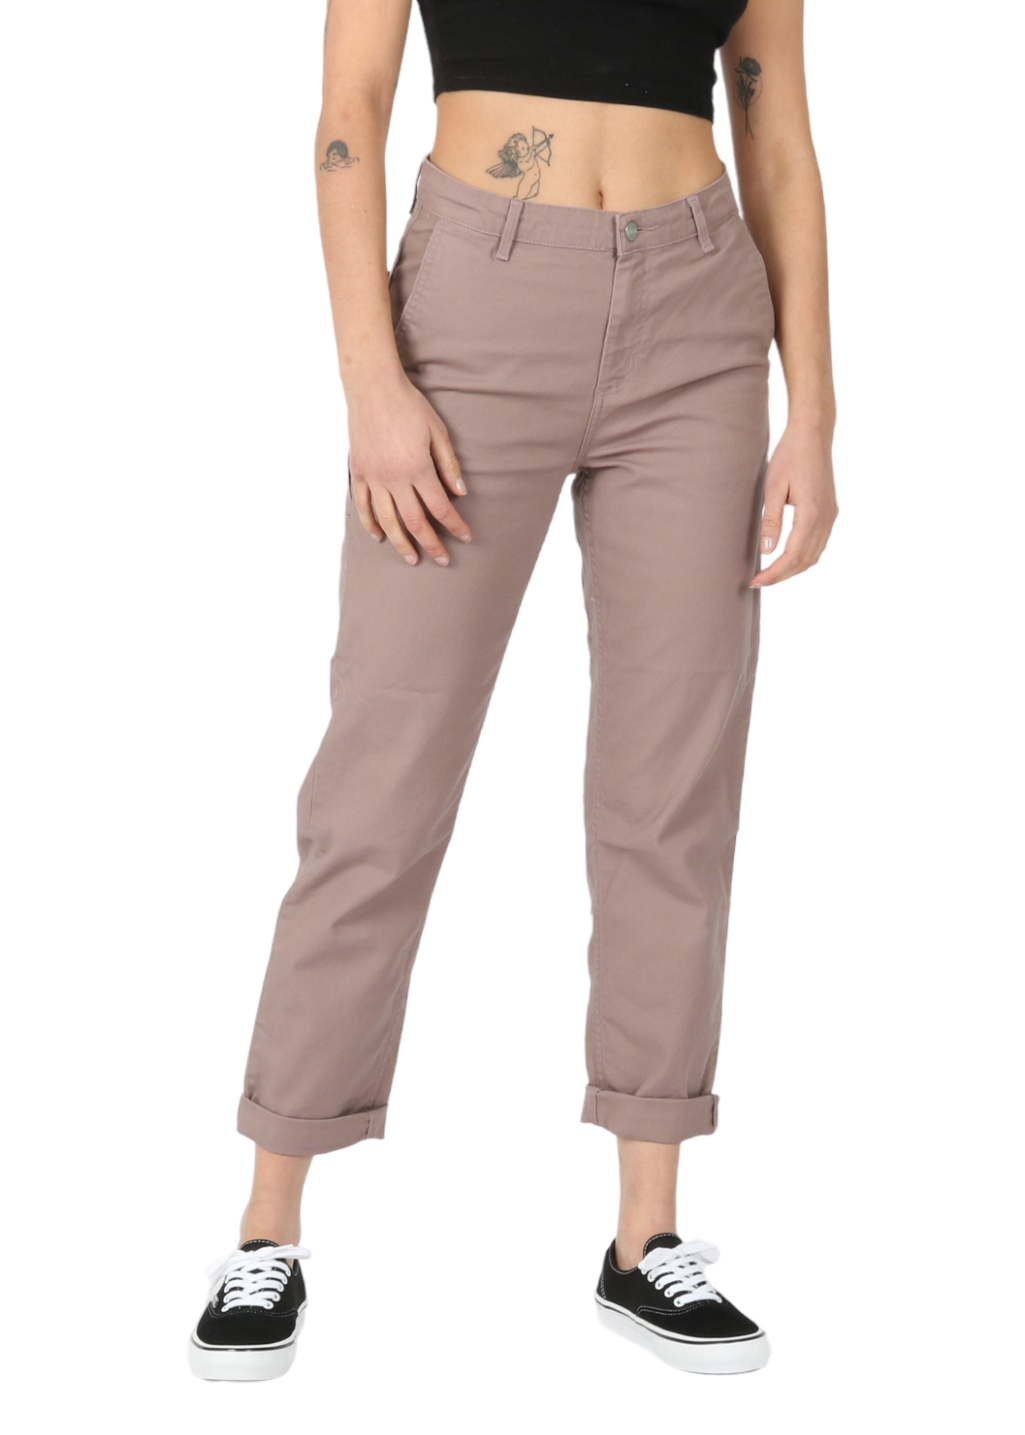 The official pants of busy women everywhere - Carhartt.com Email